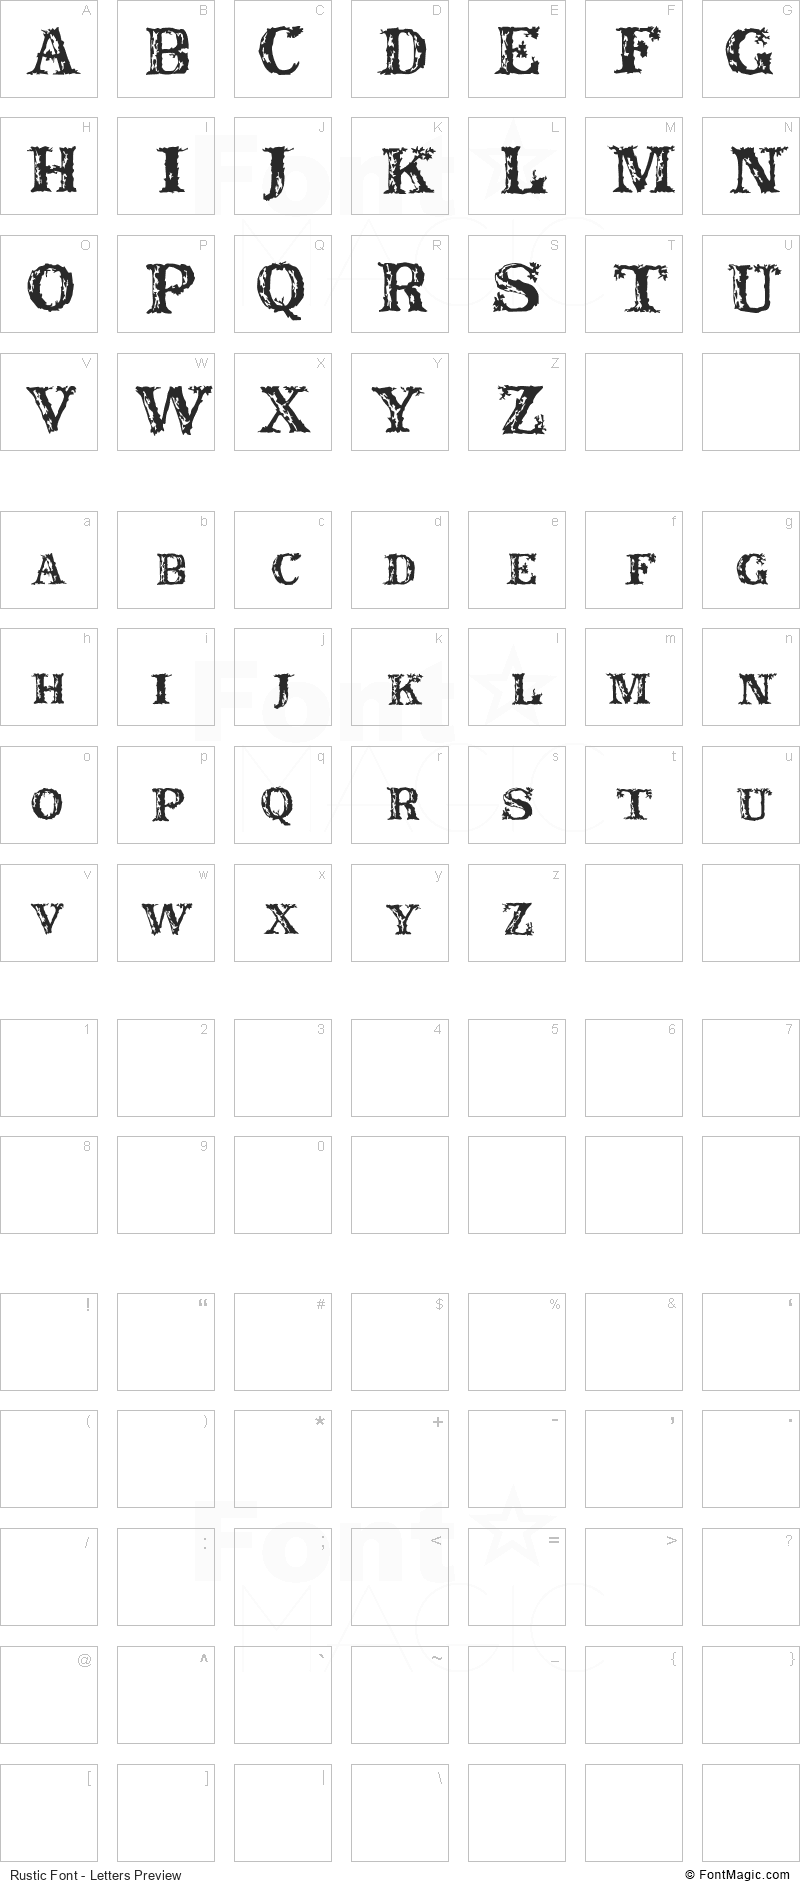 Rustic Font - All Latters Preview Chart